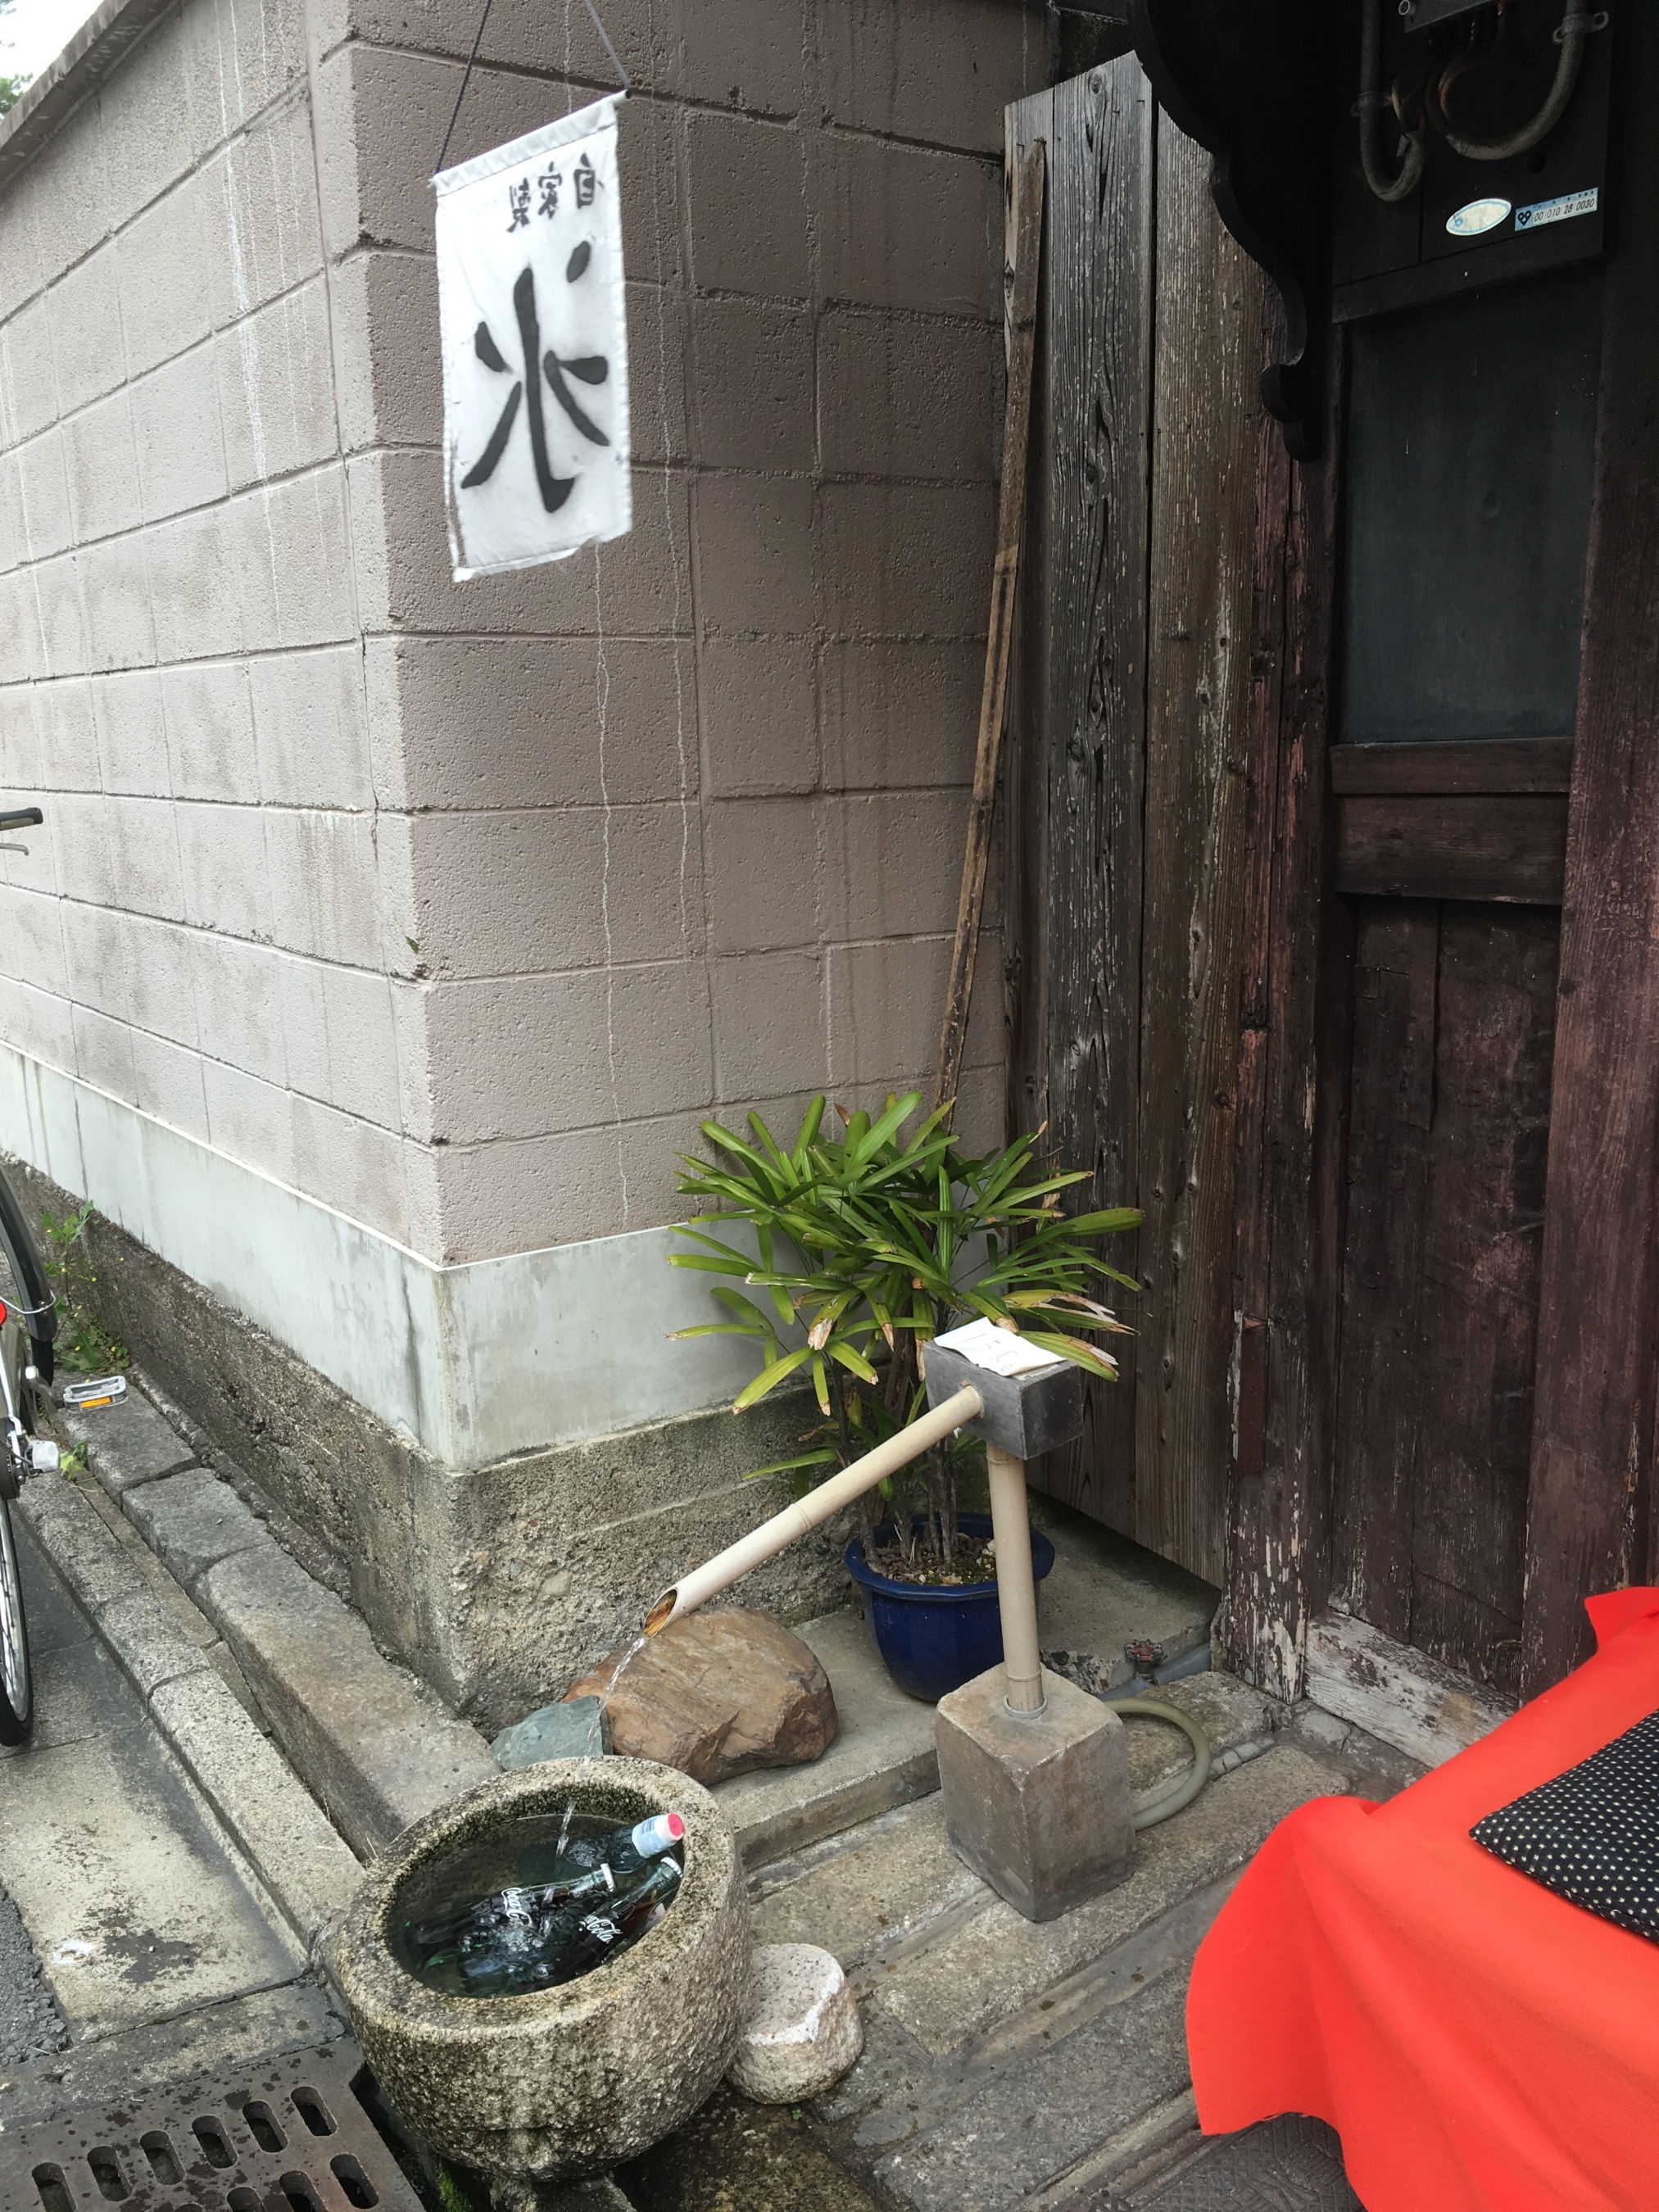 Here is the kanji for water, seen at Koshiya - a famous sweet shop near Nijo Castle. The kanji differs from that of ice in that it only has two strokes on the left rather than three. Thanks to Gabi Greve for pointing this out. :-)